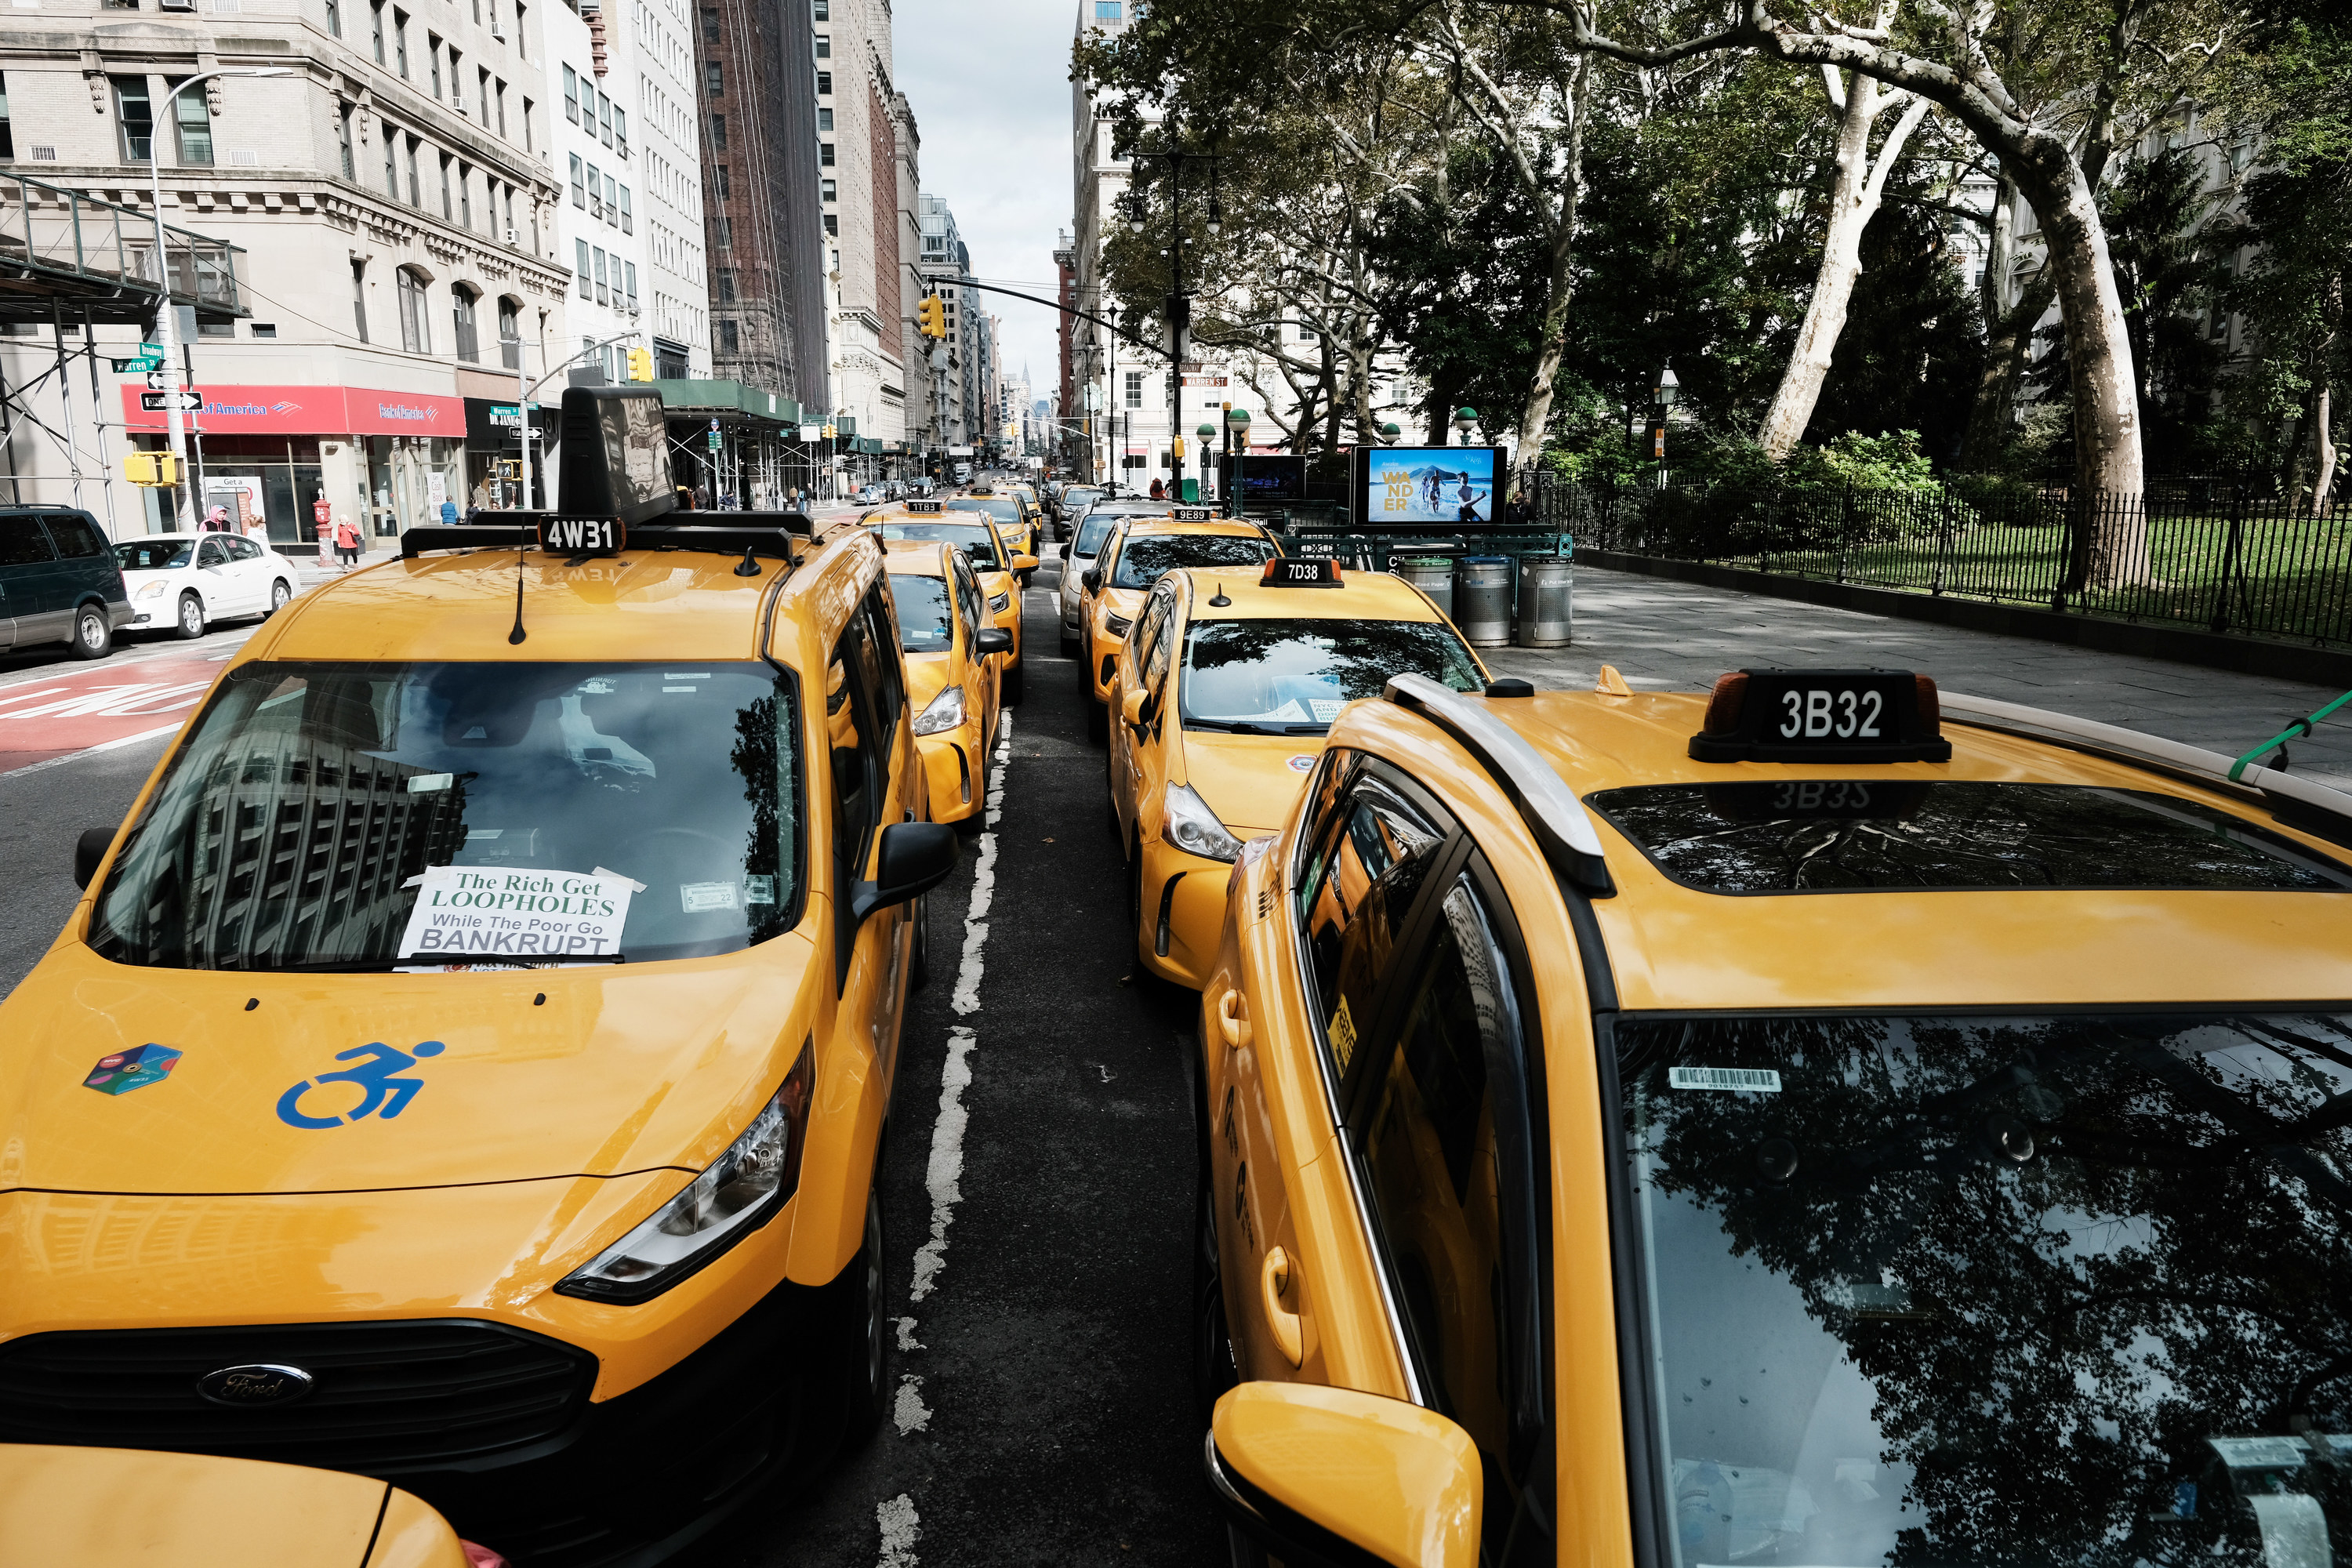 Taxi cabs sitting in two rows in New York City